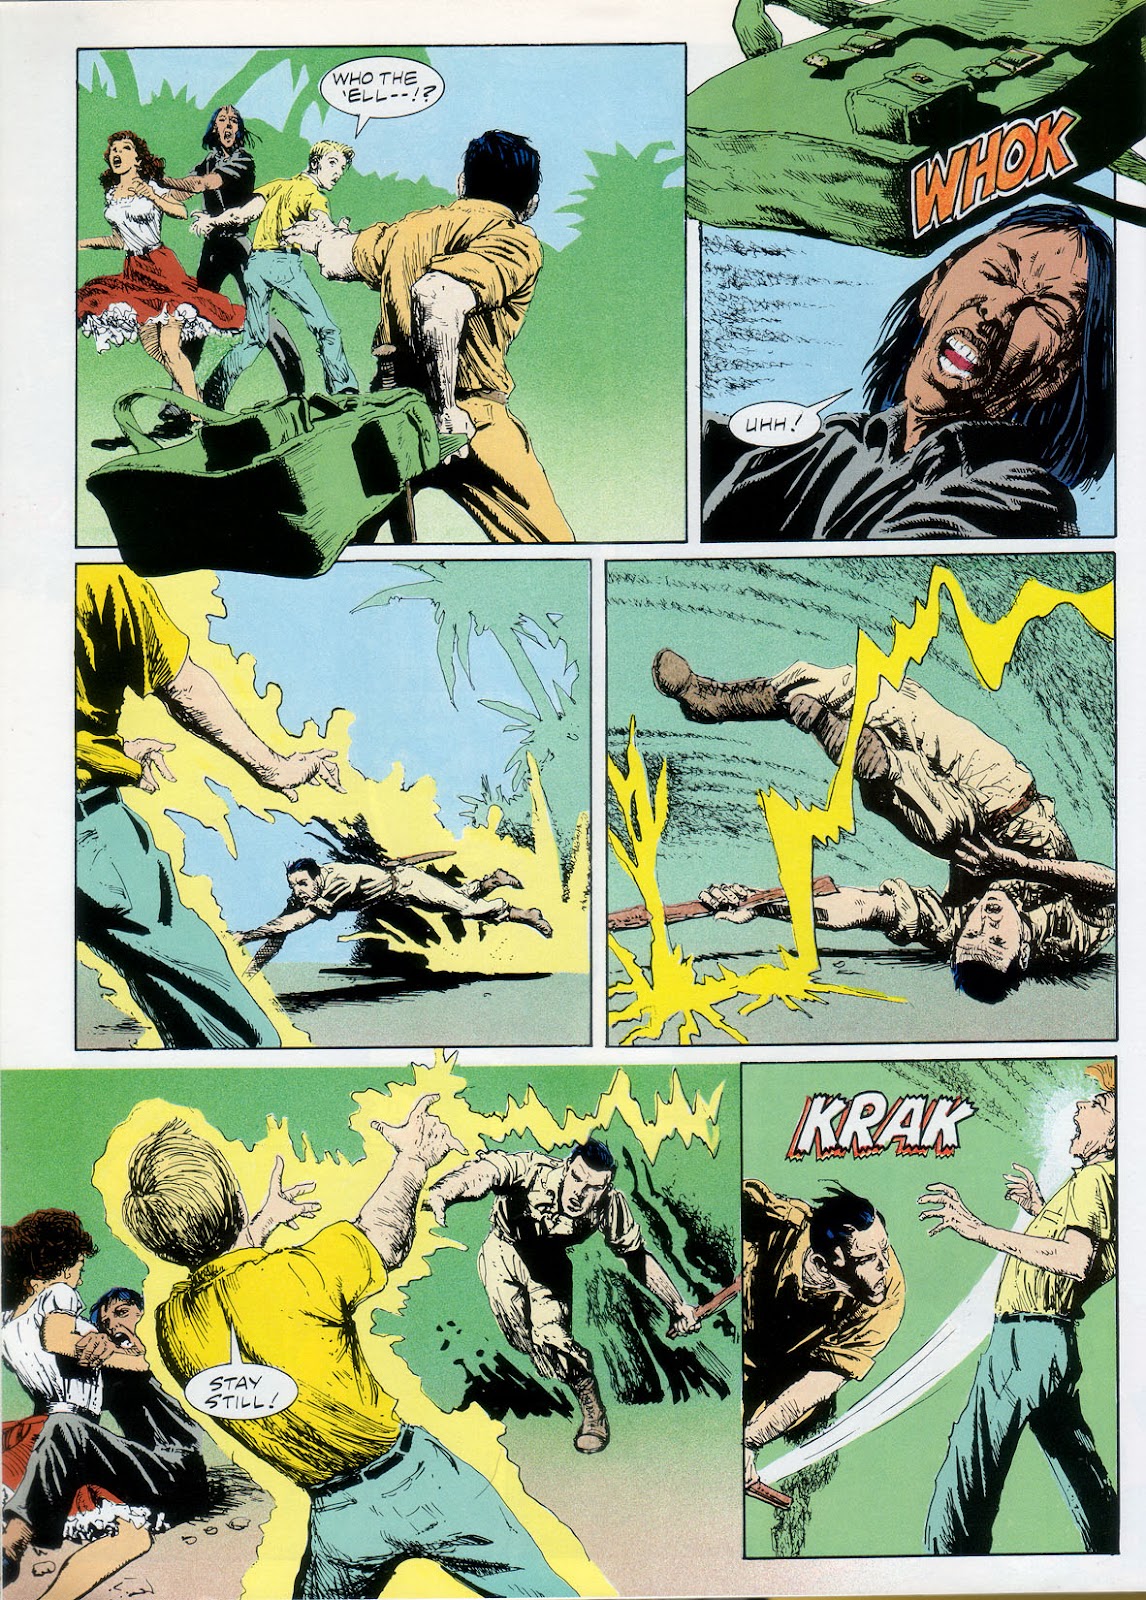 Marvel Graphic Novel issue 57 - Rick Mason - The Agent - Page 38